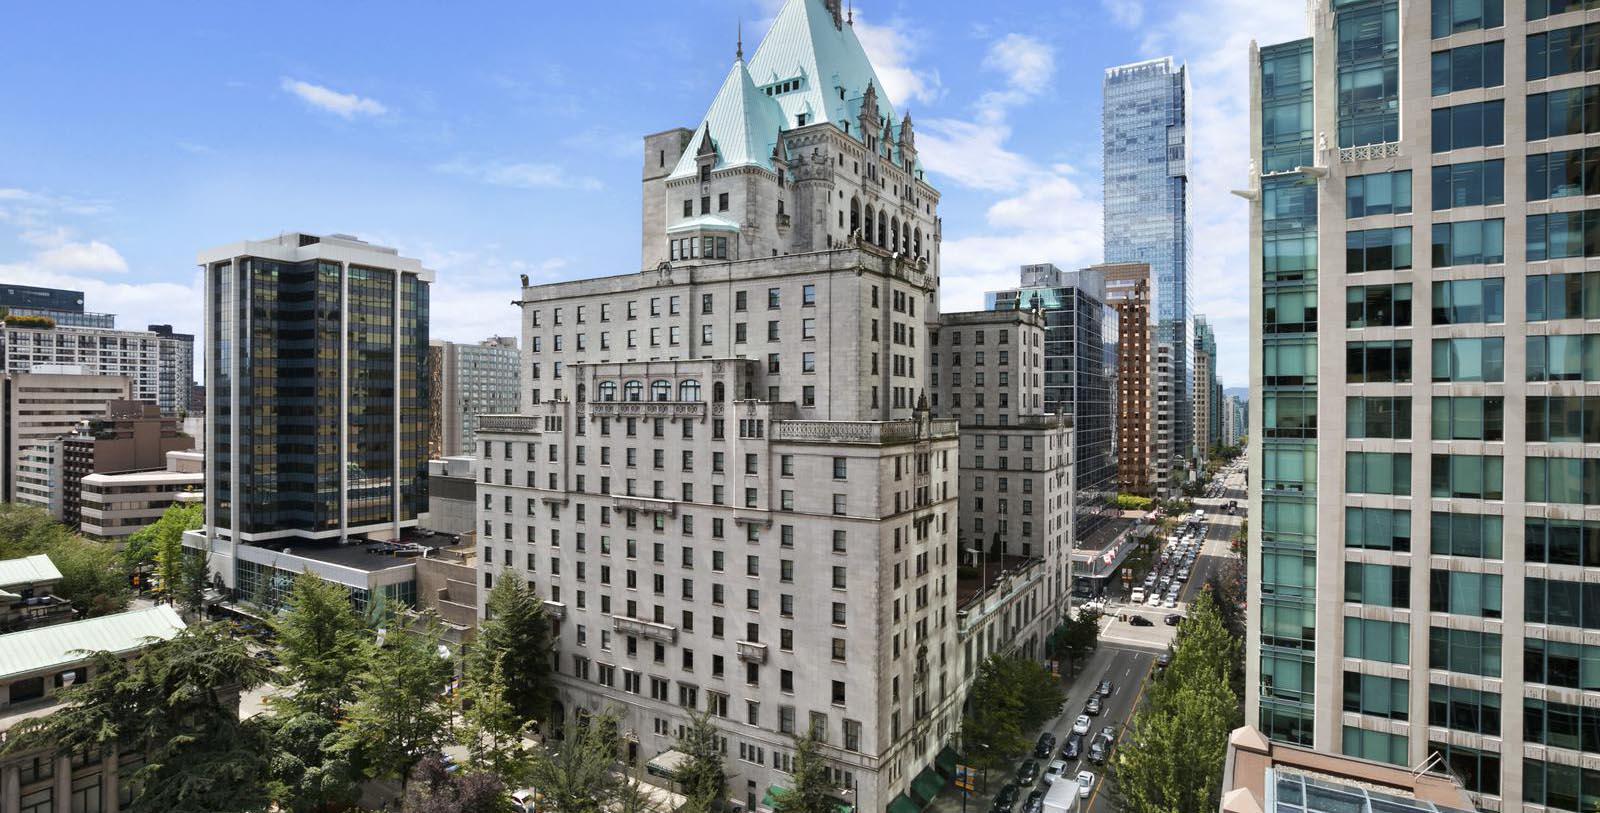 Image of hotel exterior Fairmont Hotel Vancouver, 1939, Member of Historic Hotels Worldwide, in Vancouver, Canada, Overview Video